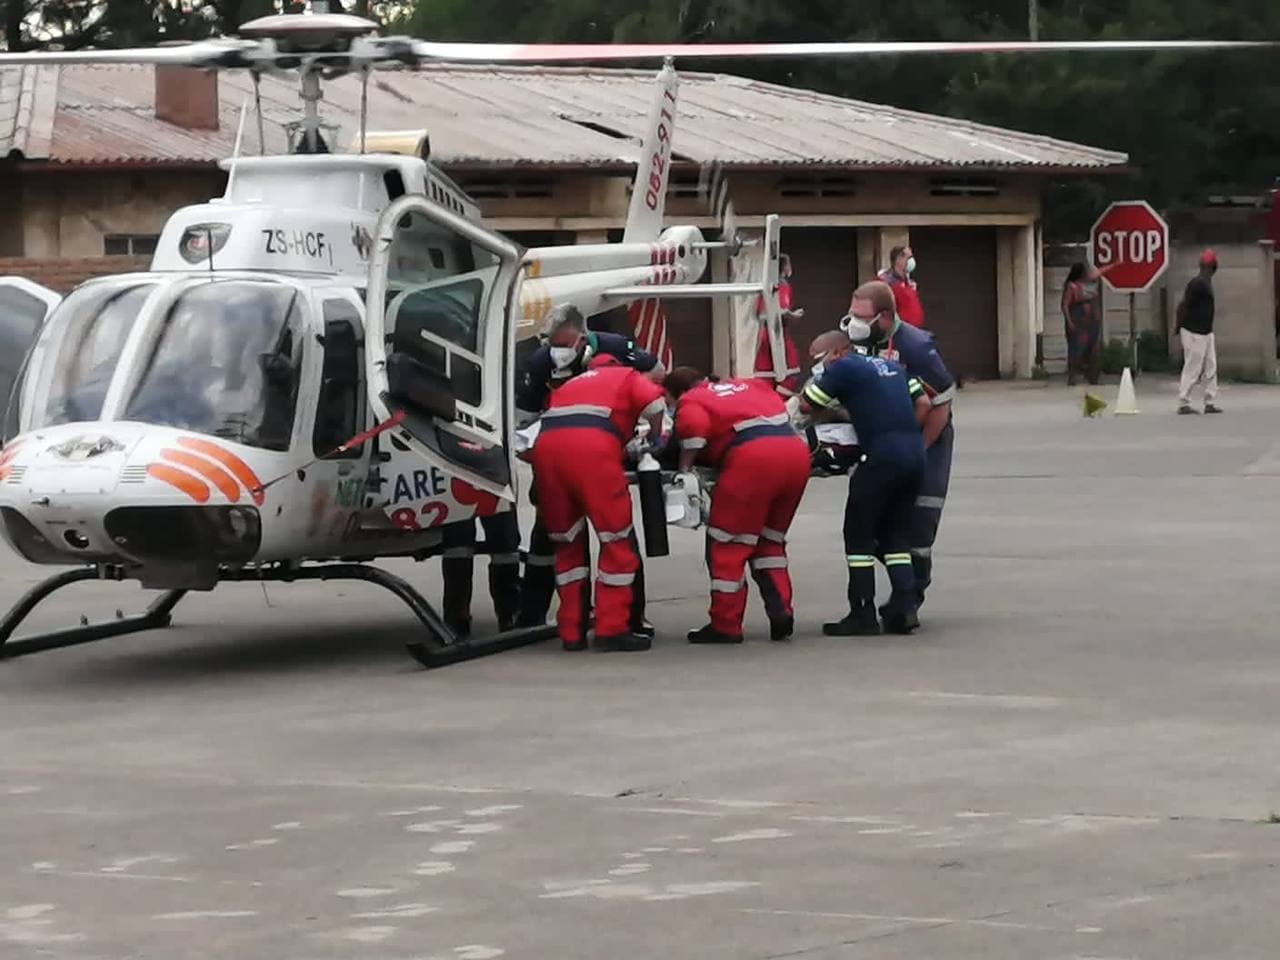 Delivery bike man sustained critical injuries